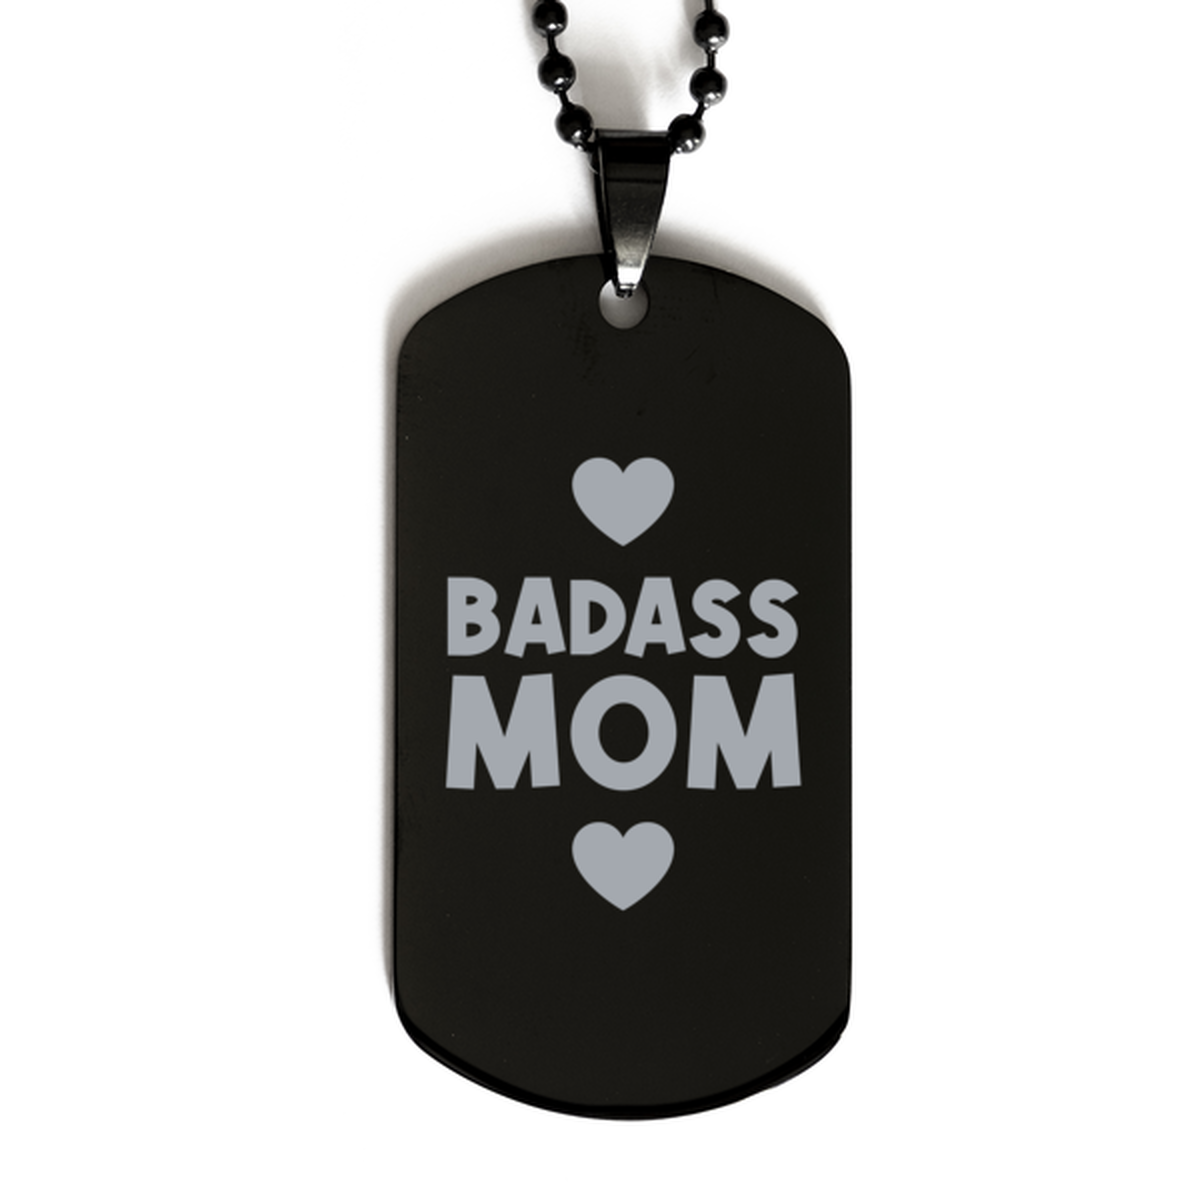 Mom Black Dog Tag, Badass Mom, Funny Family Gifts  Necklace For Mom From Son Daughter